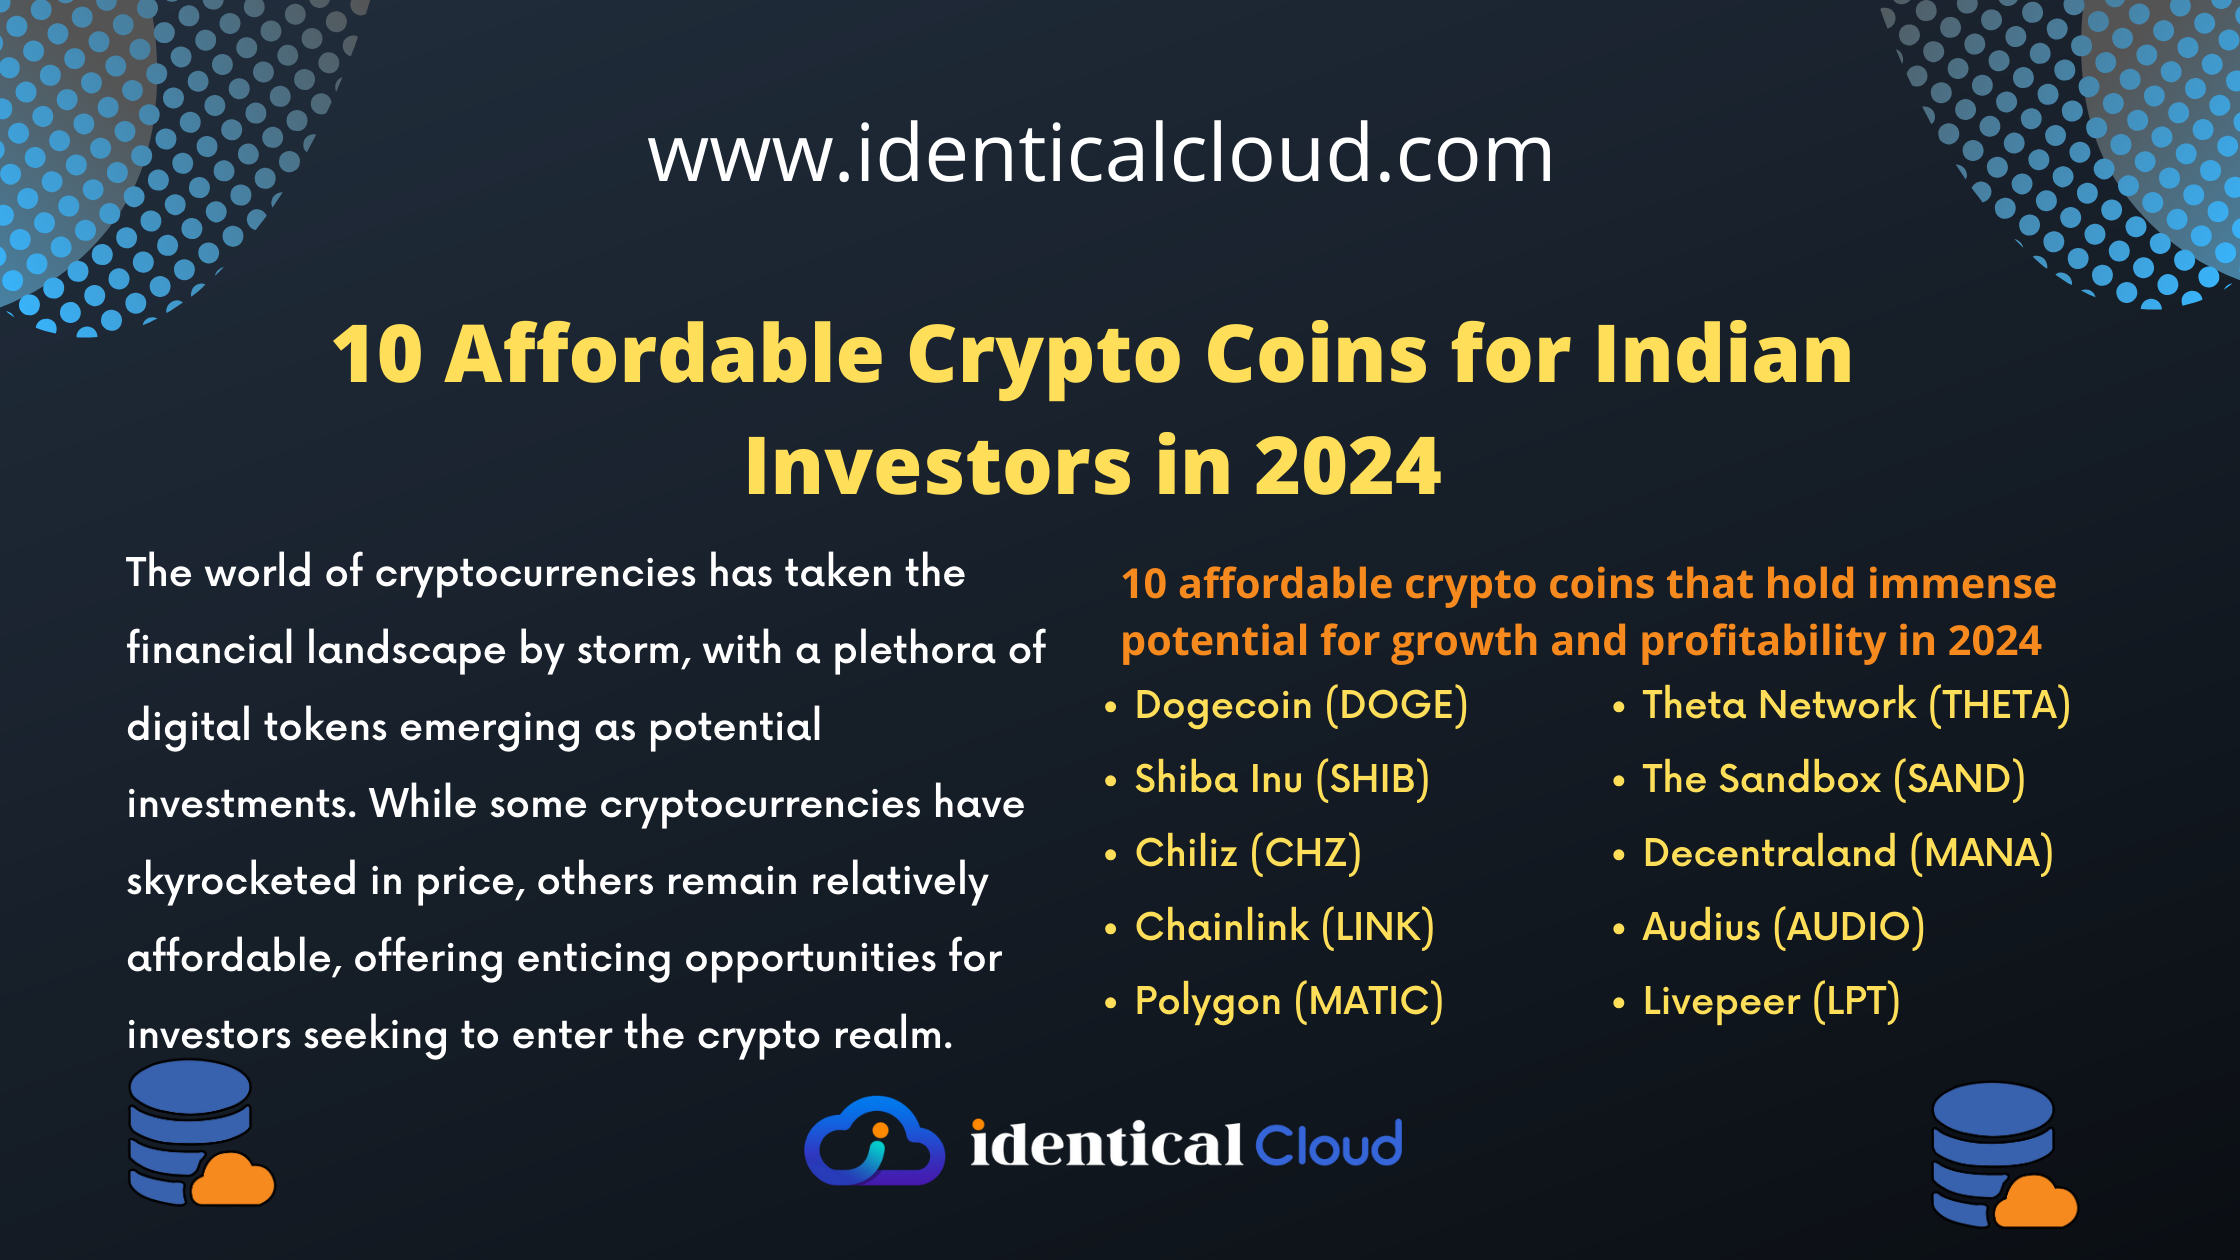 10 Affordable Crypto Coins for Indian Investors in 2024 - identicalcloud.com